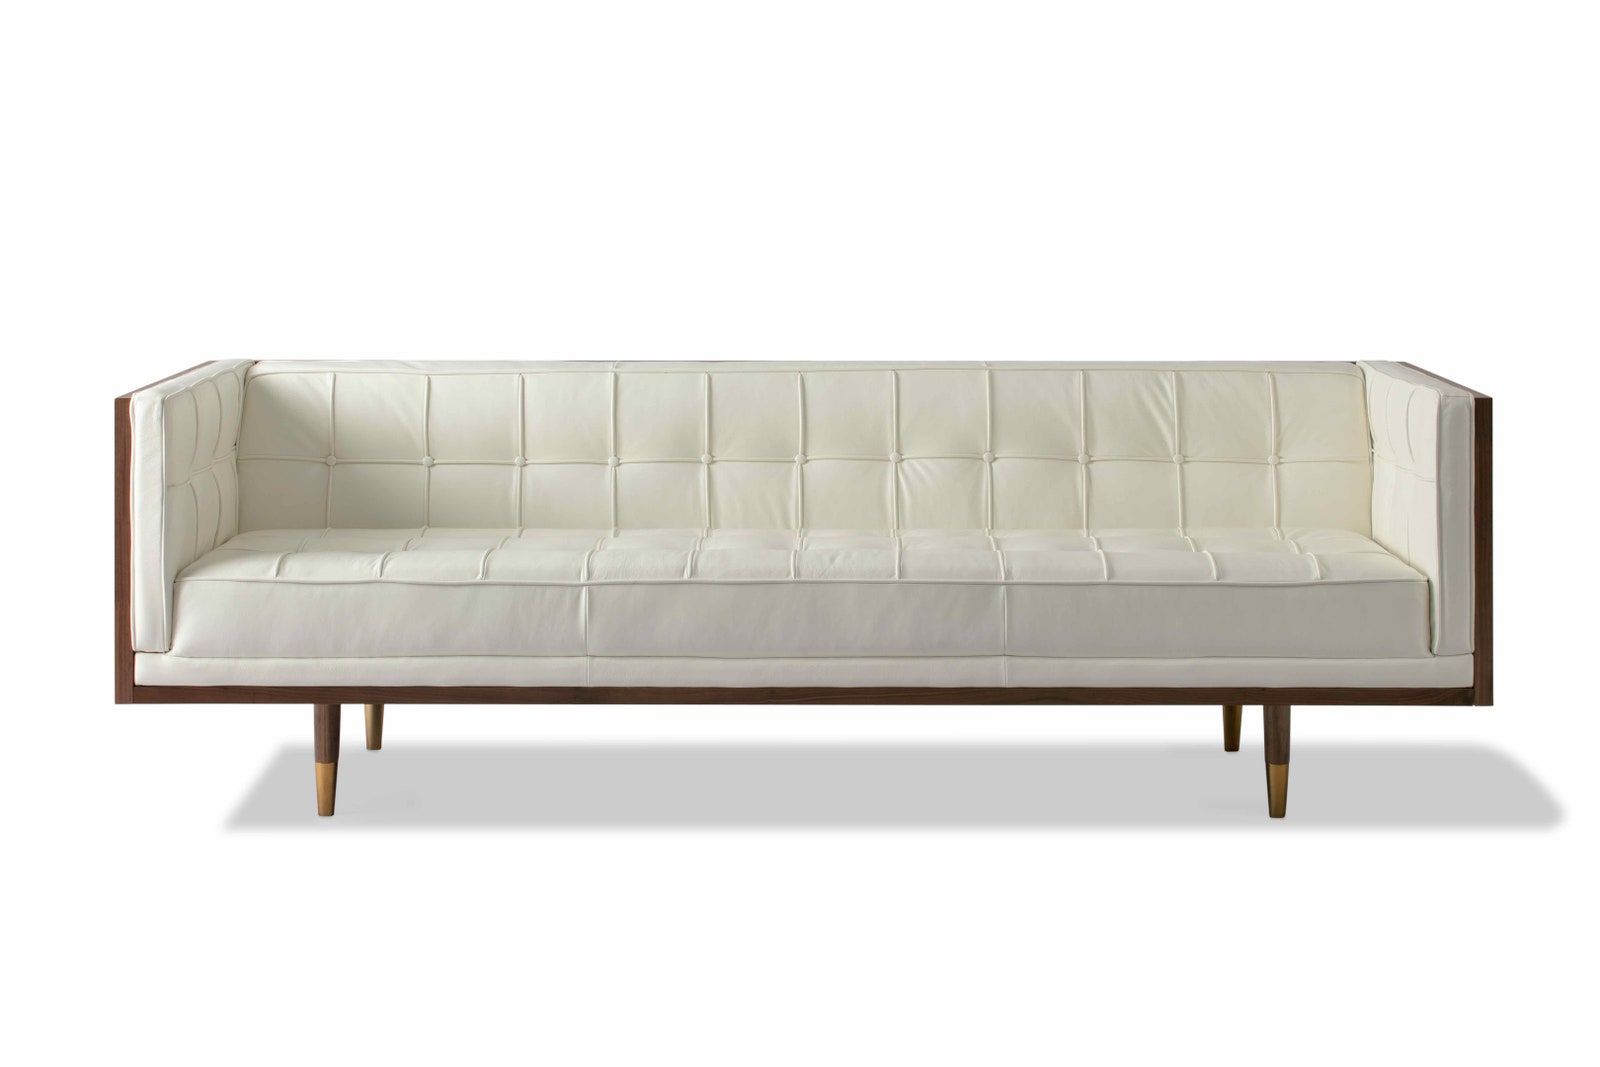 5 Mid Century Modern Sofas To Breathe Life Into Your Living Space |  Architectural Digest Within Mid Century Modern Sofas (View 10 of 15)